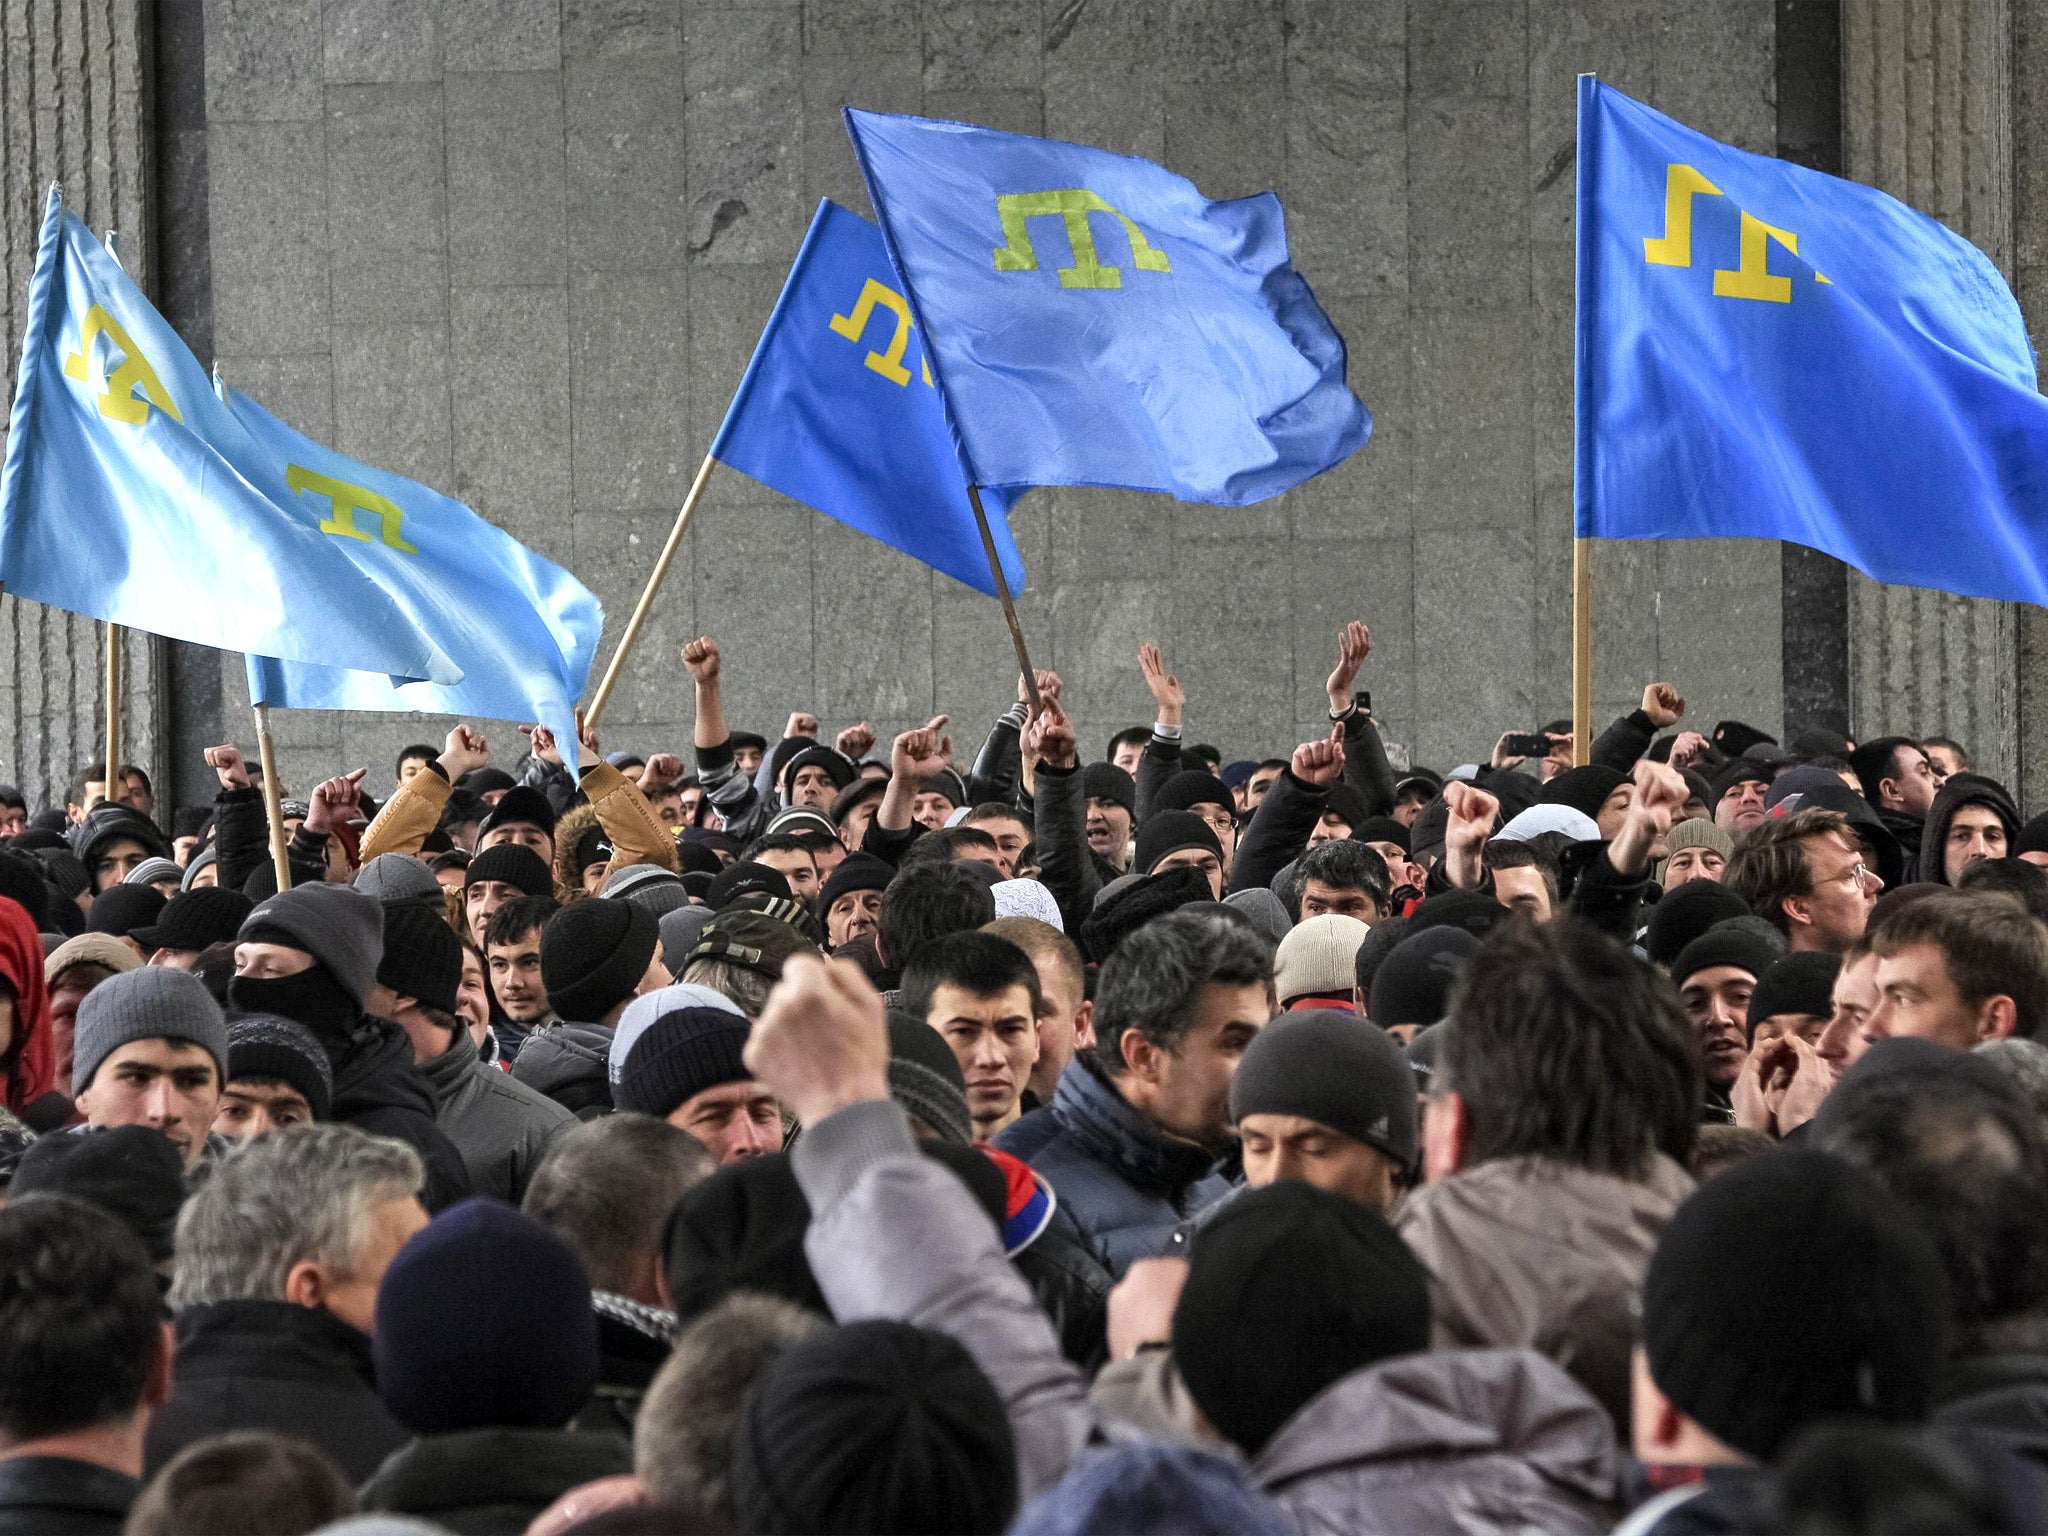 A rally by Tatars near the Crimean parliament building in Simferopol last week led to scuffles with ethnic Russians